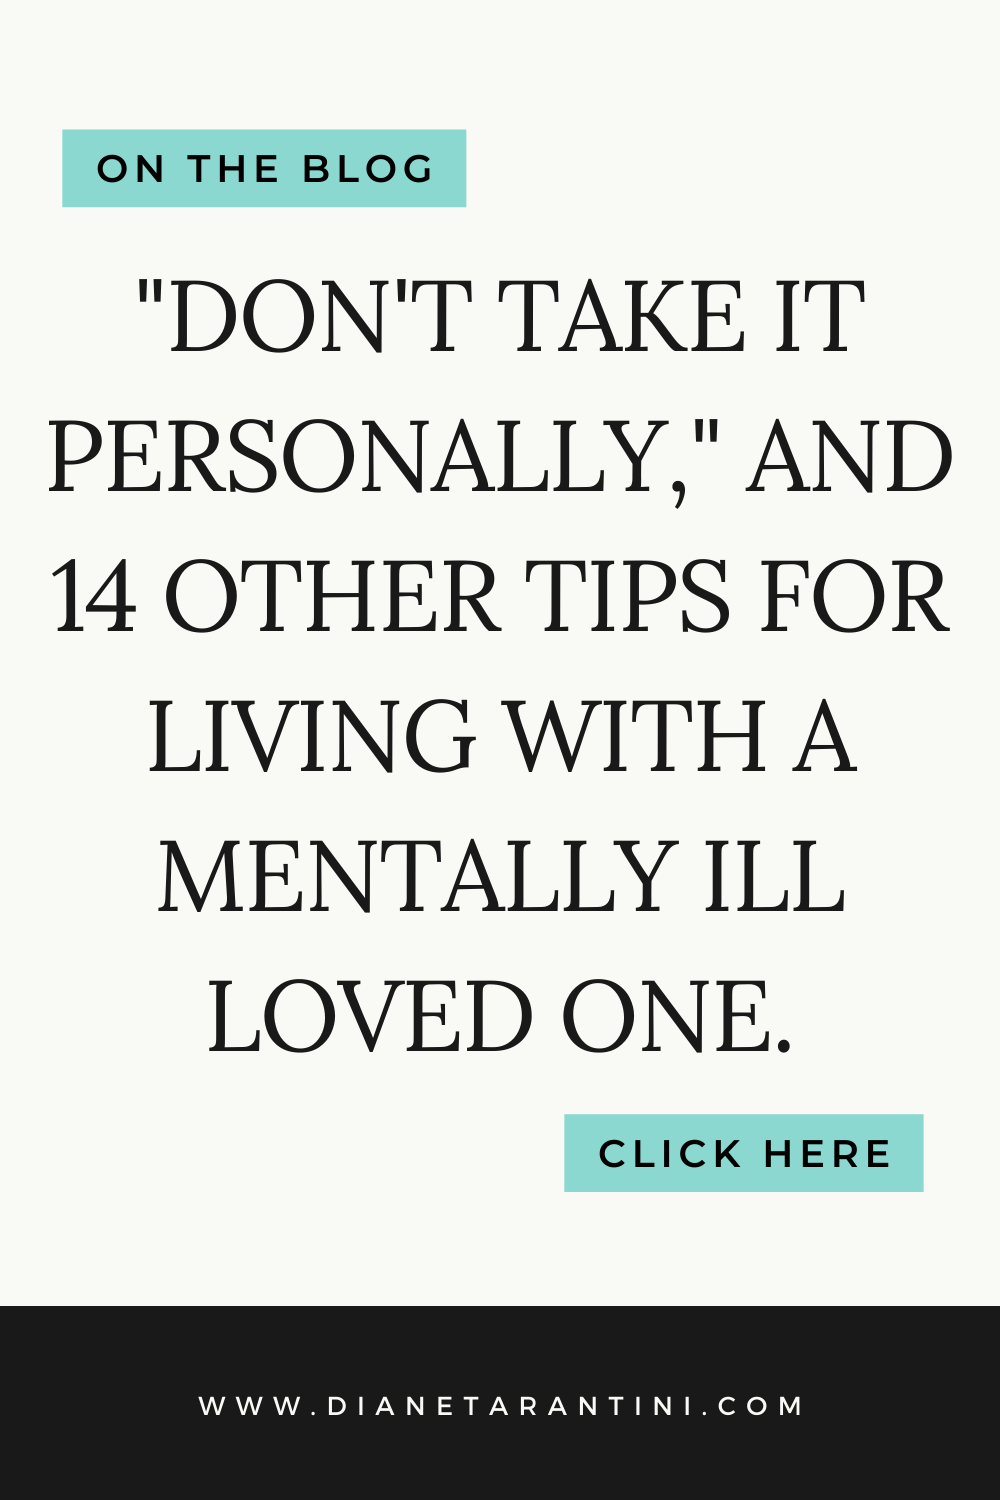 How to live with someone with mental illness - tips for helping someone with mental illness